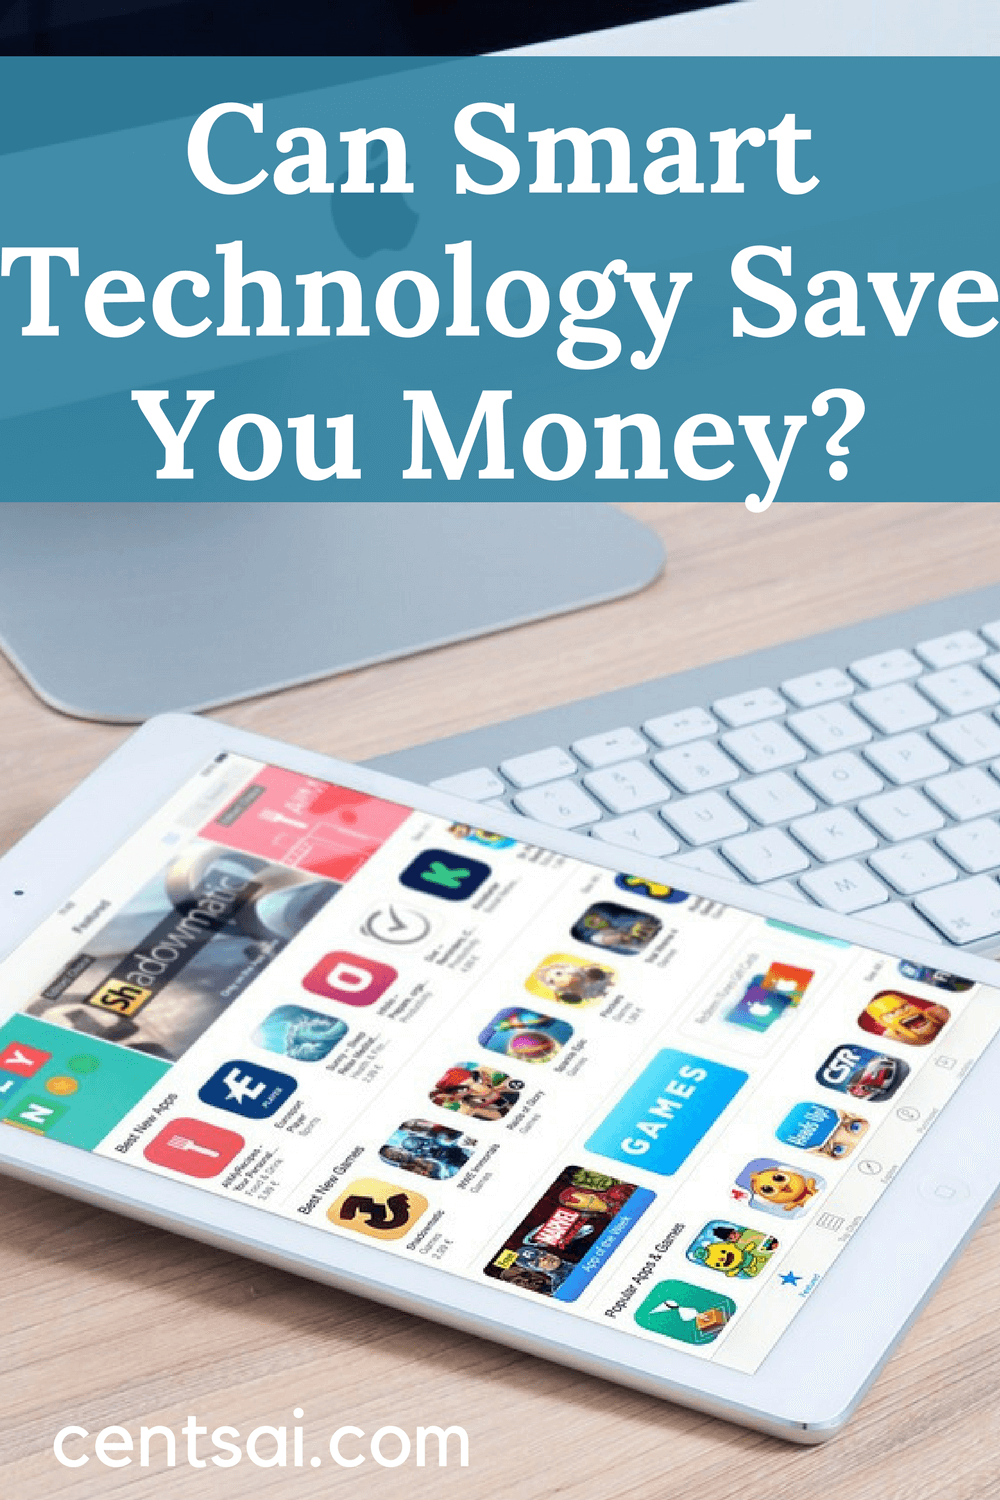 Smart technology may save you money in the long run, but it’s often costly upfront. So is it worth getting?